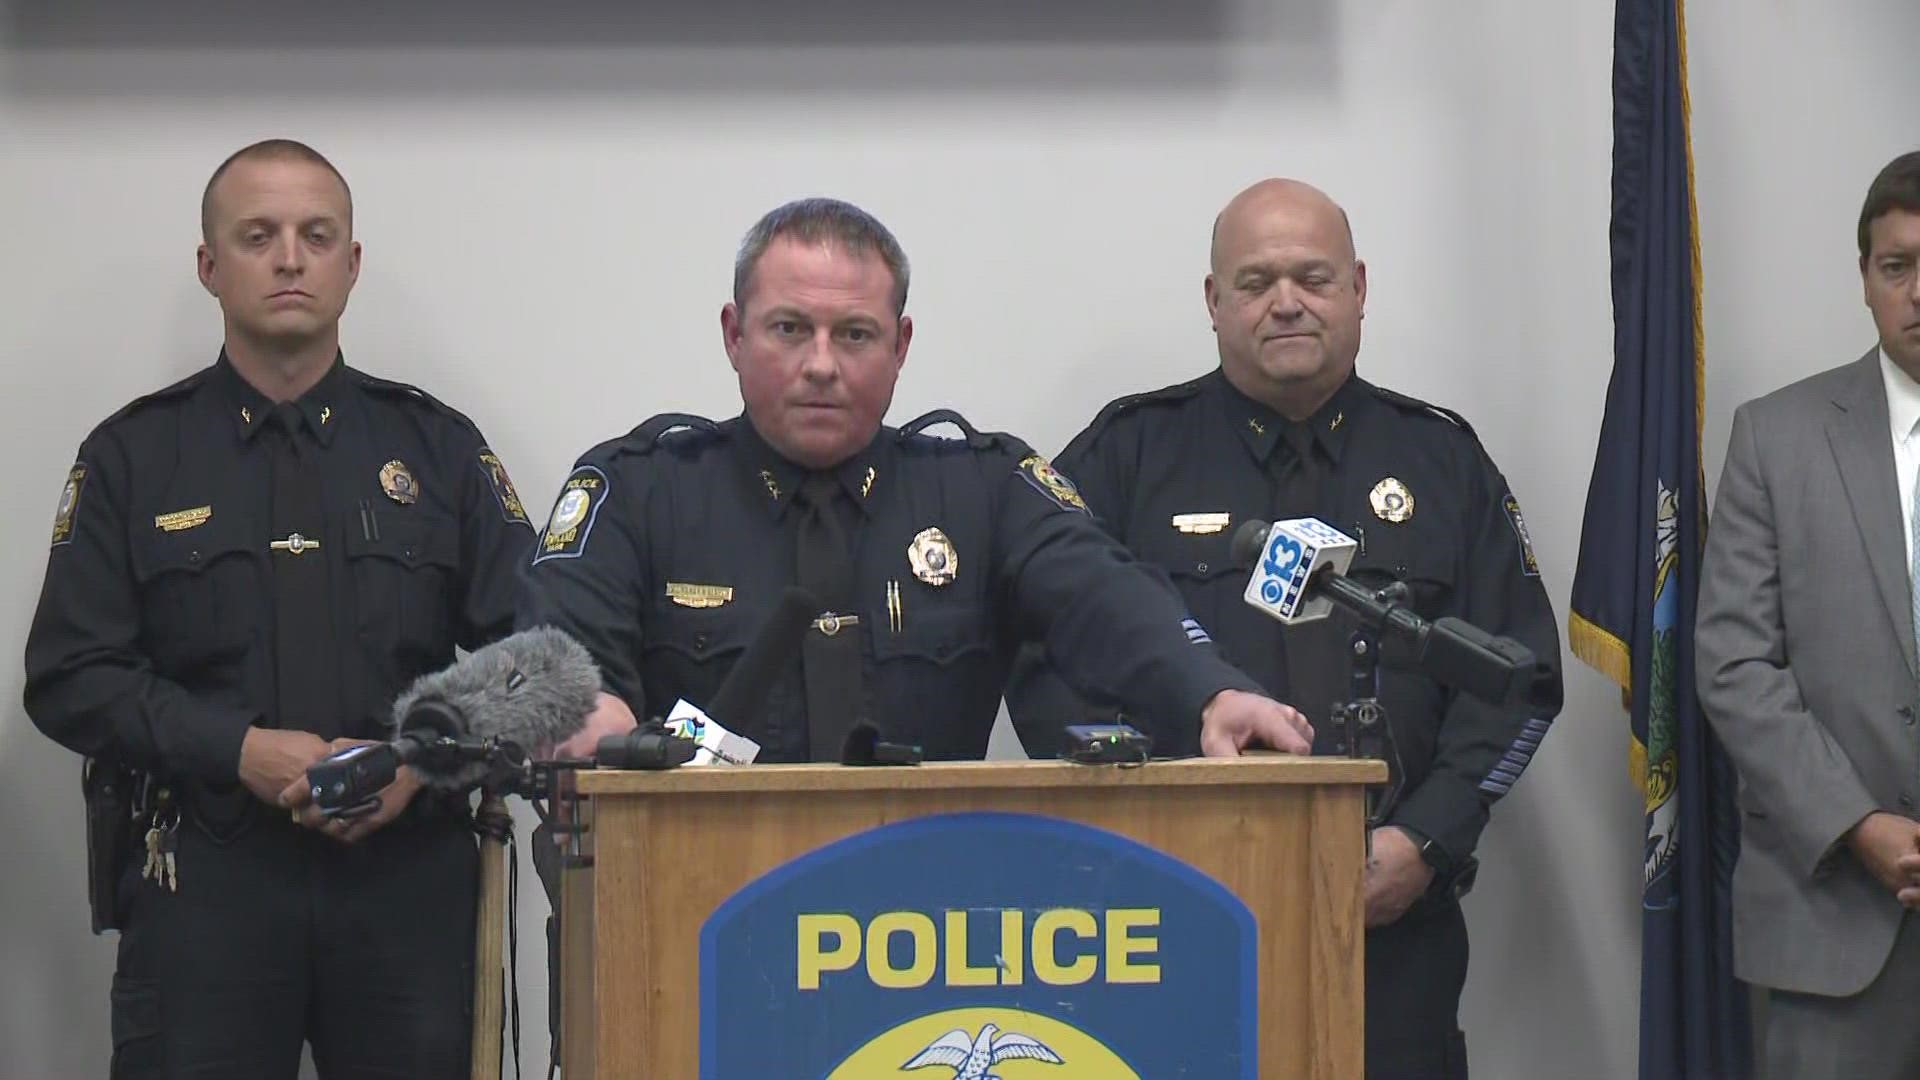 Portland police Chief Heath Gorham spoke at the press conference to discuss the recent uptick in violent crimes.